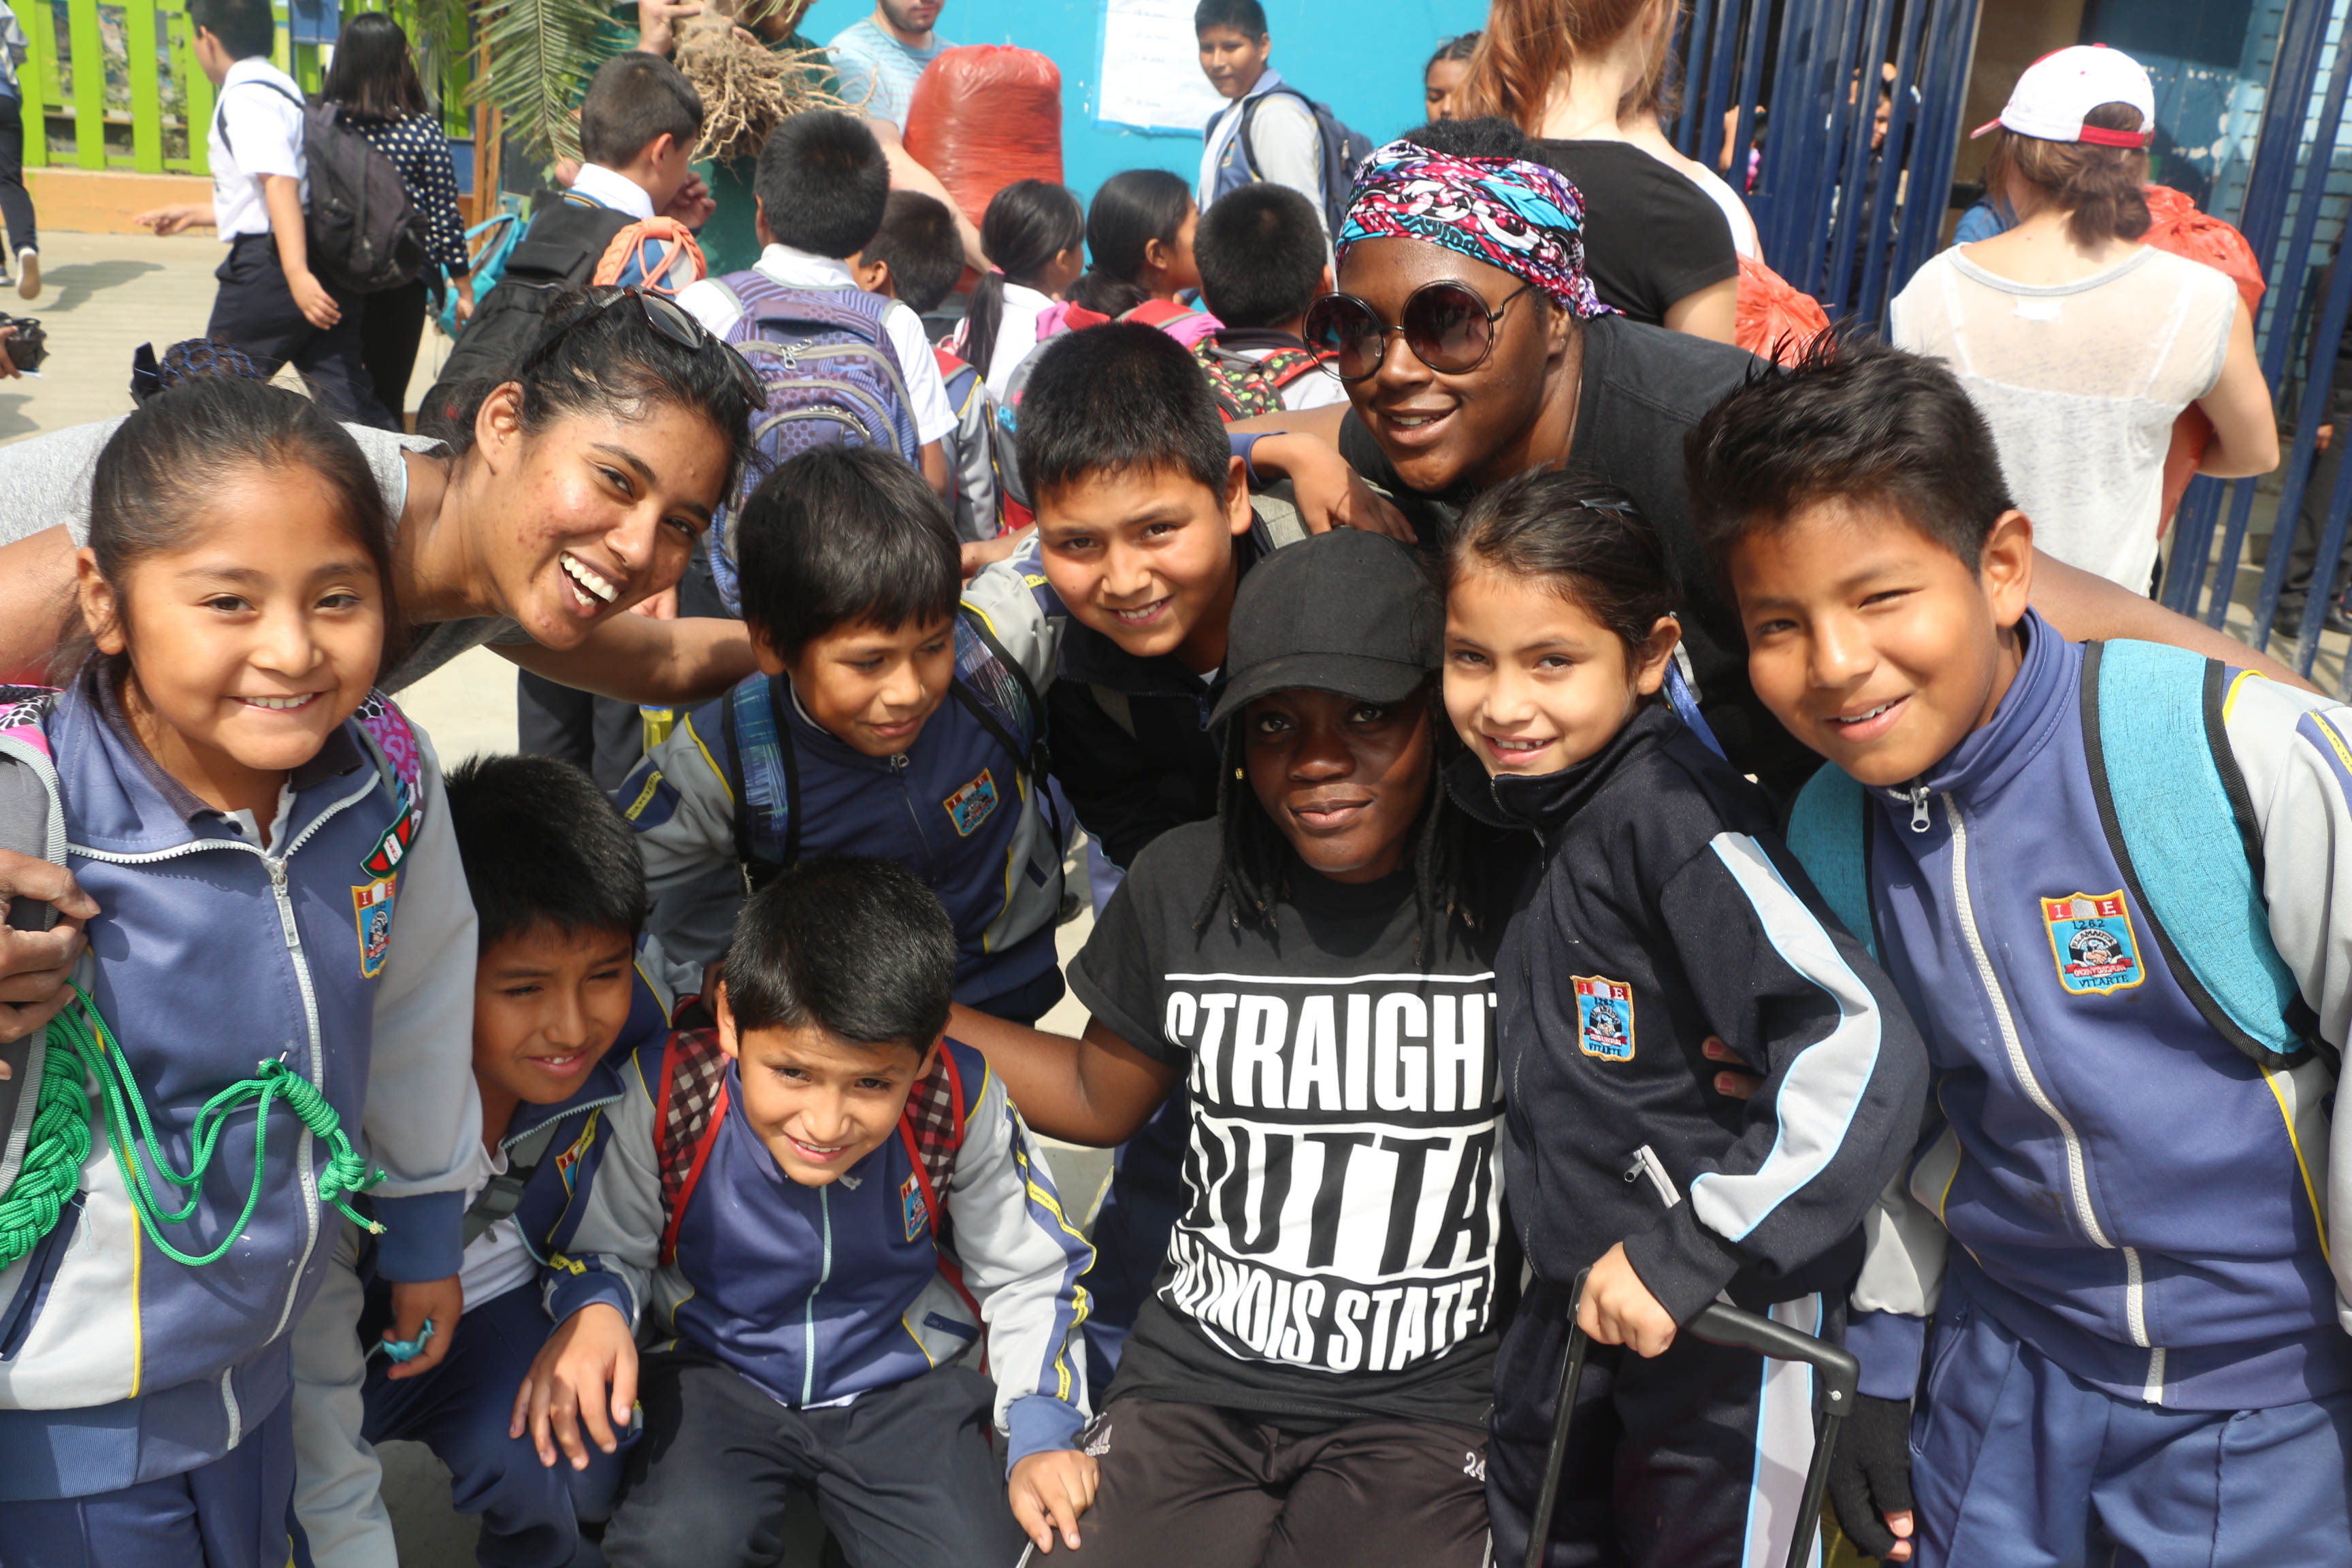 Jessica White poses with group in Peru